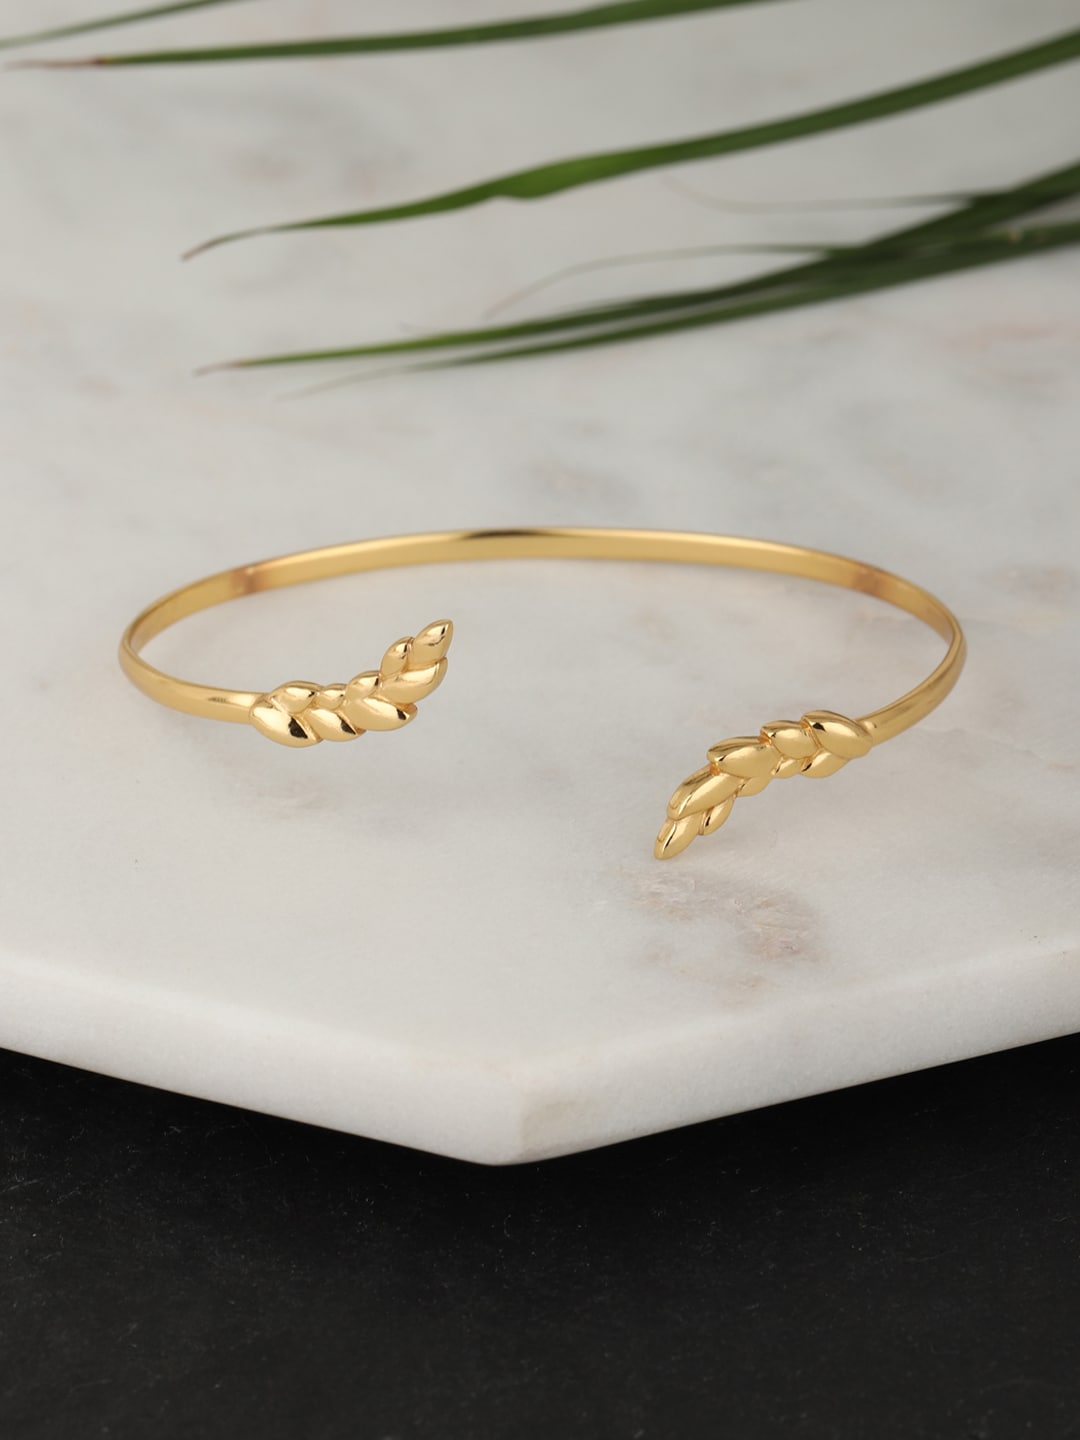 Carlton London Gold-Plated Leaf-Shaped Cuff Bracelet Price in India